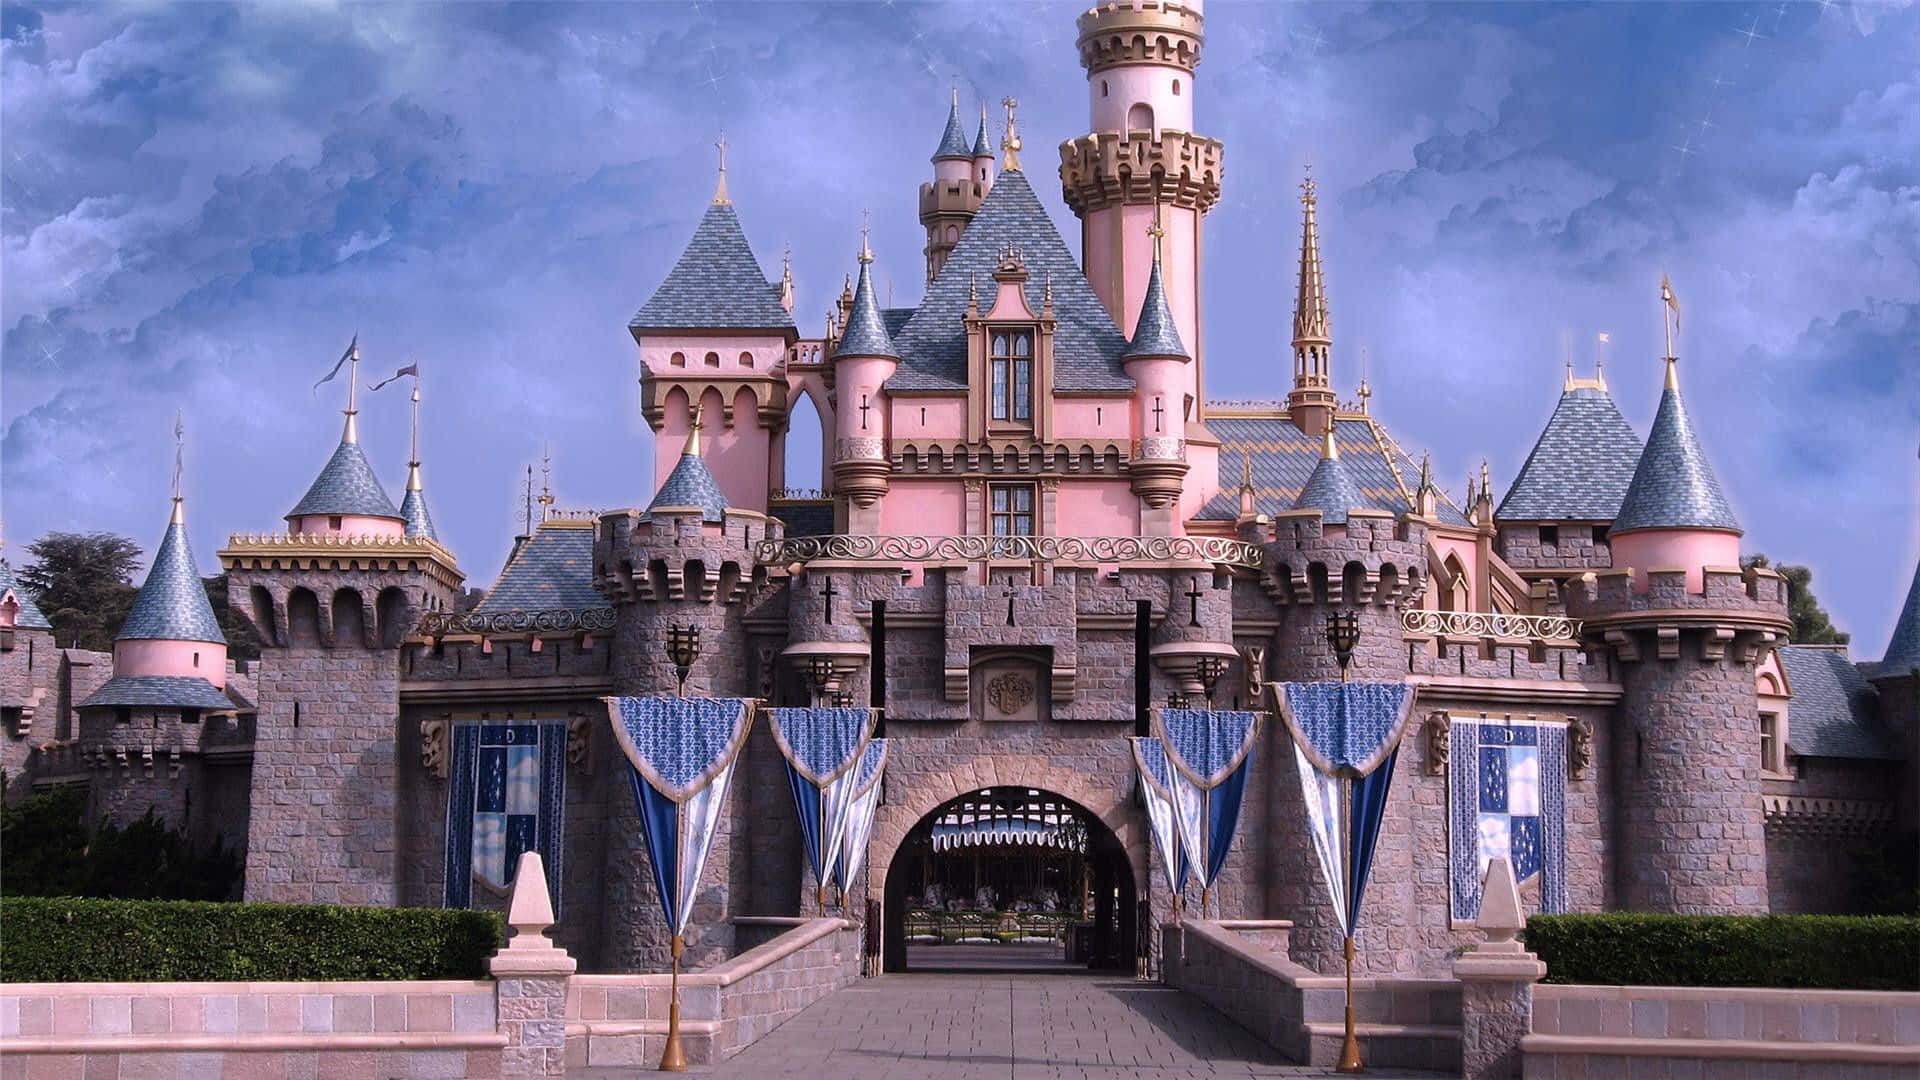 The Iconic Disney Castle in All its Splendor